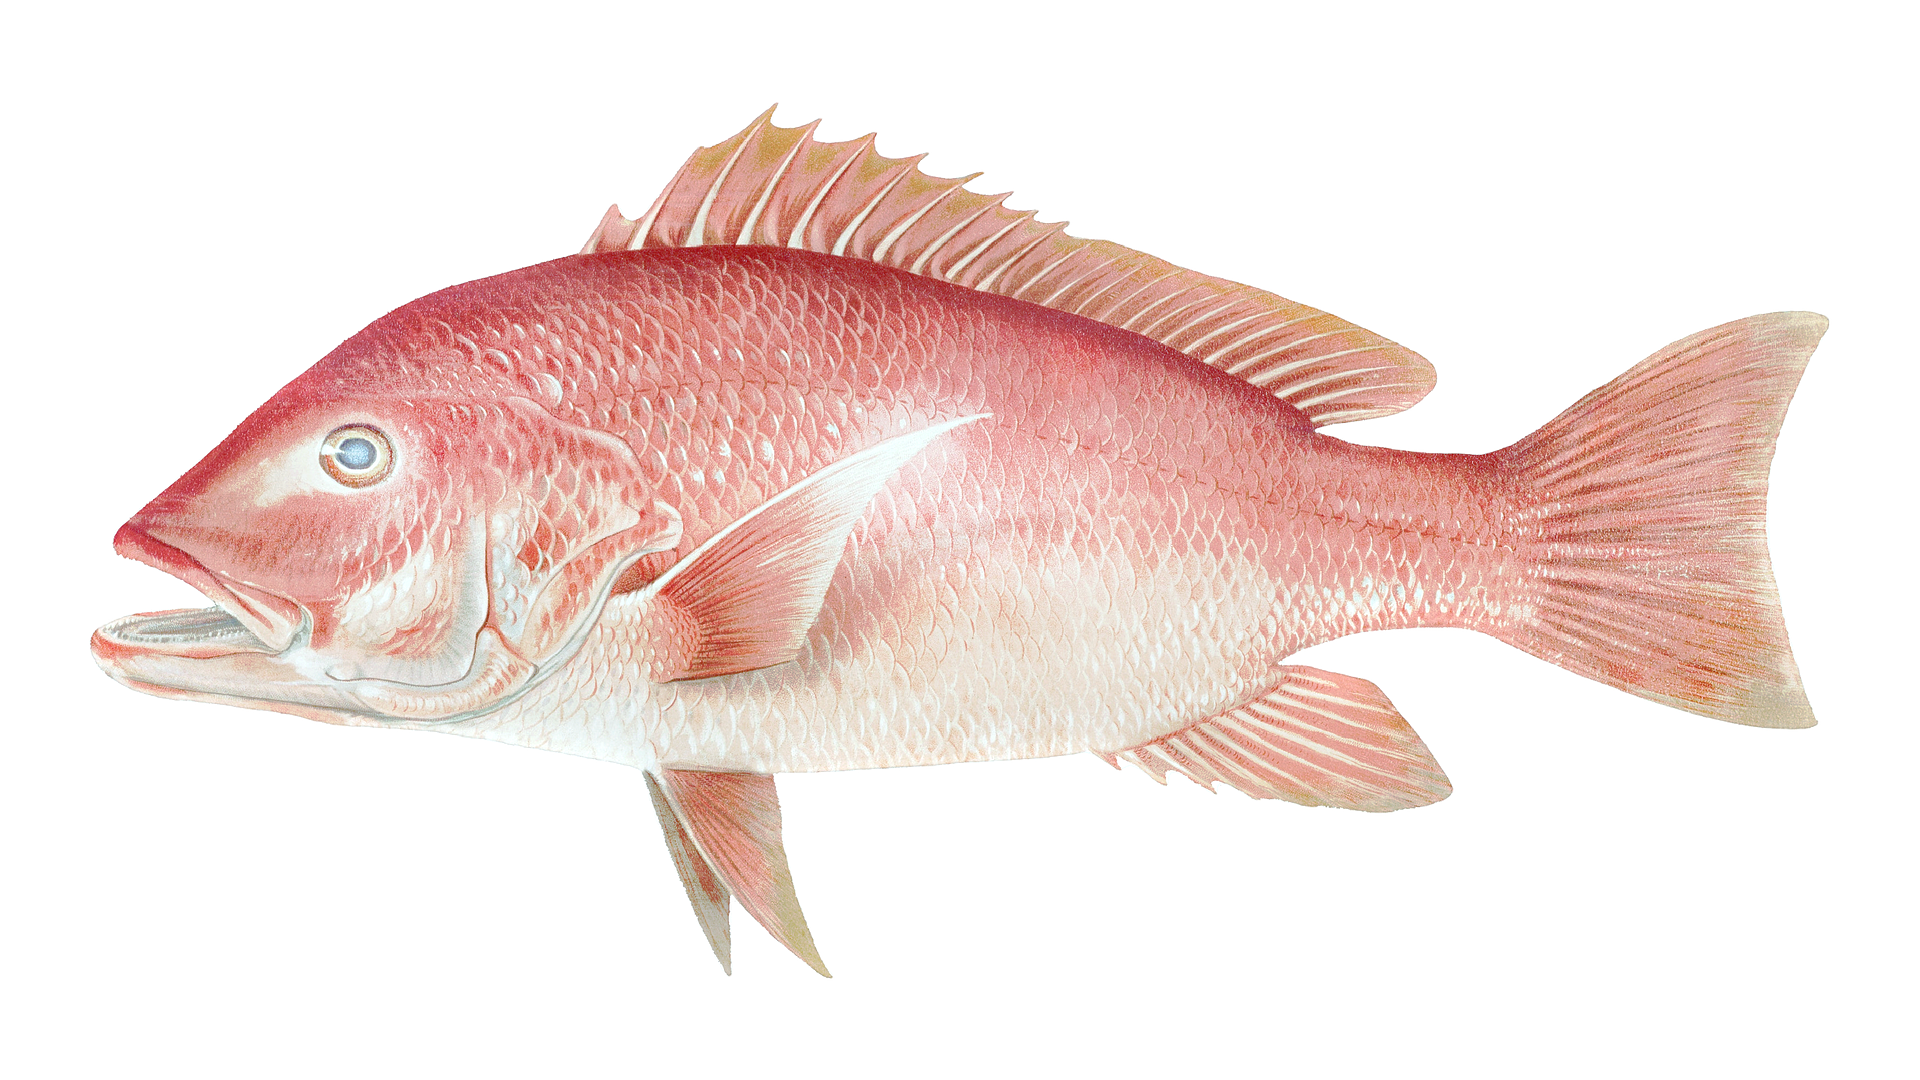 A red snapper fish